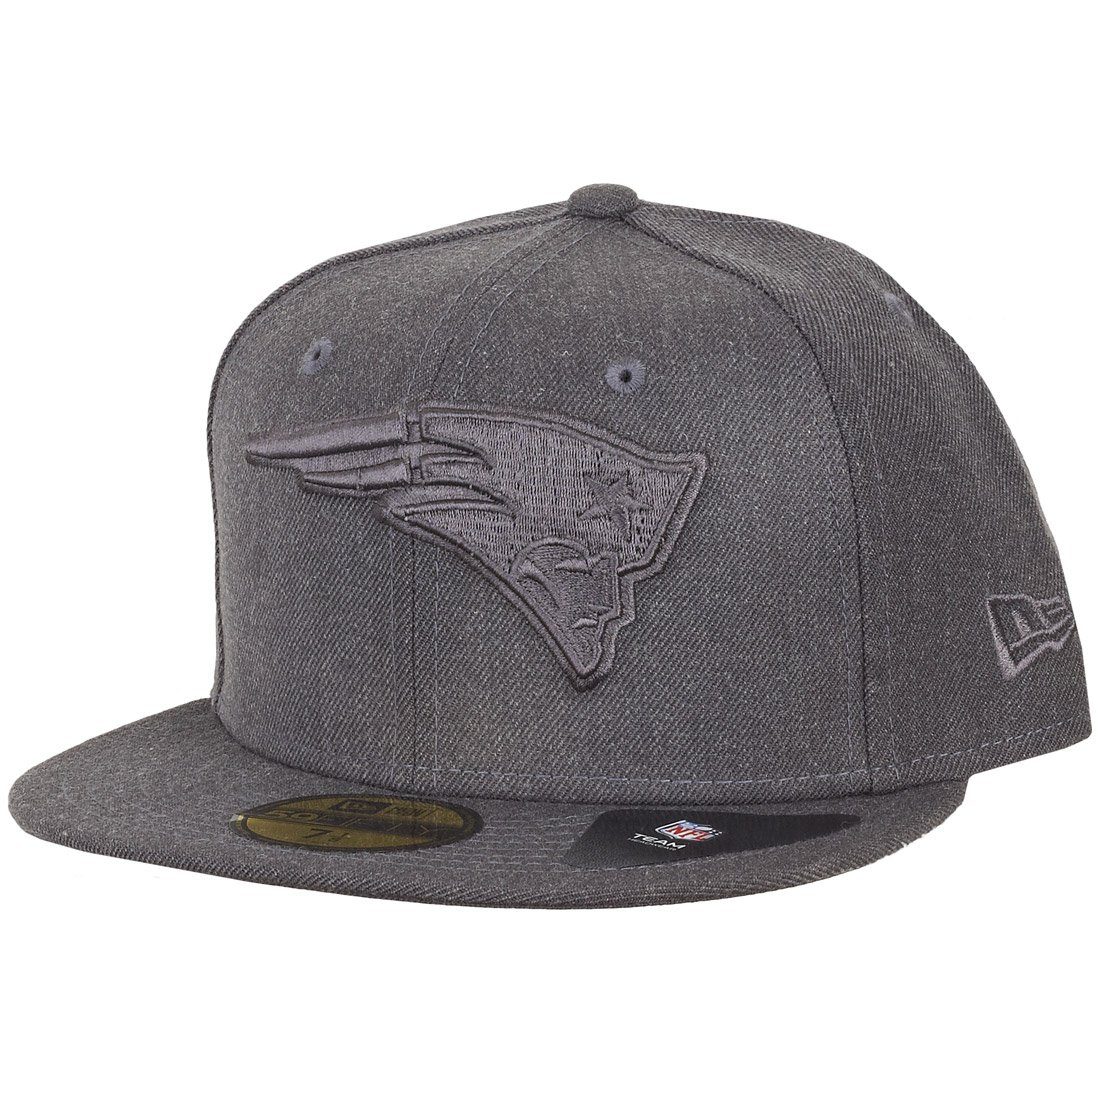 Patriots England New New Cap Fitted Era 59Fifty